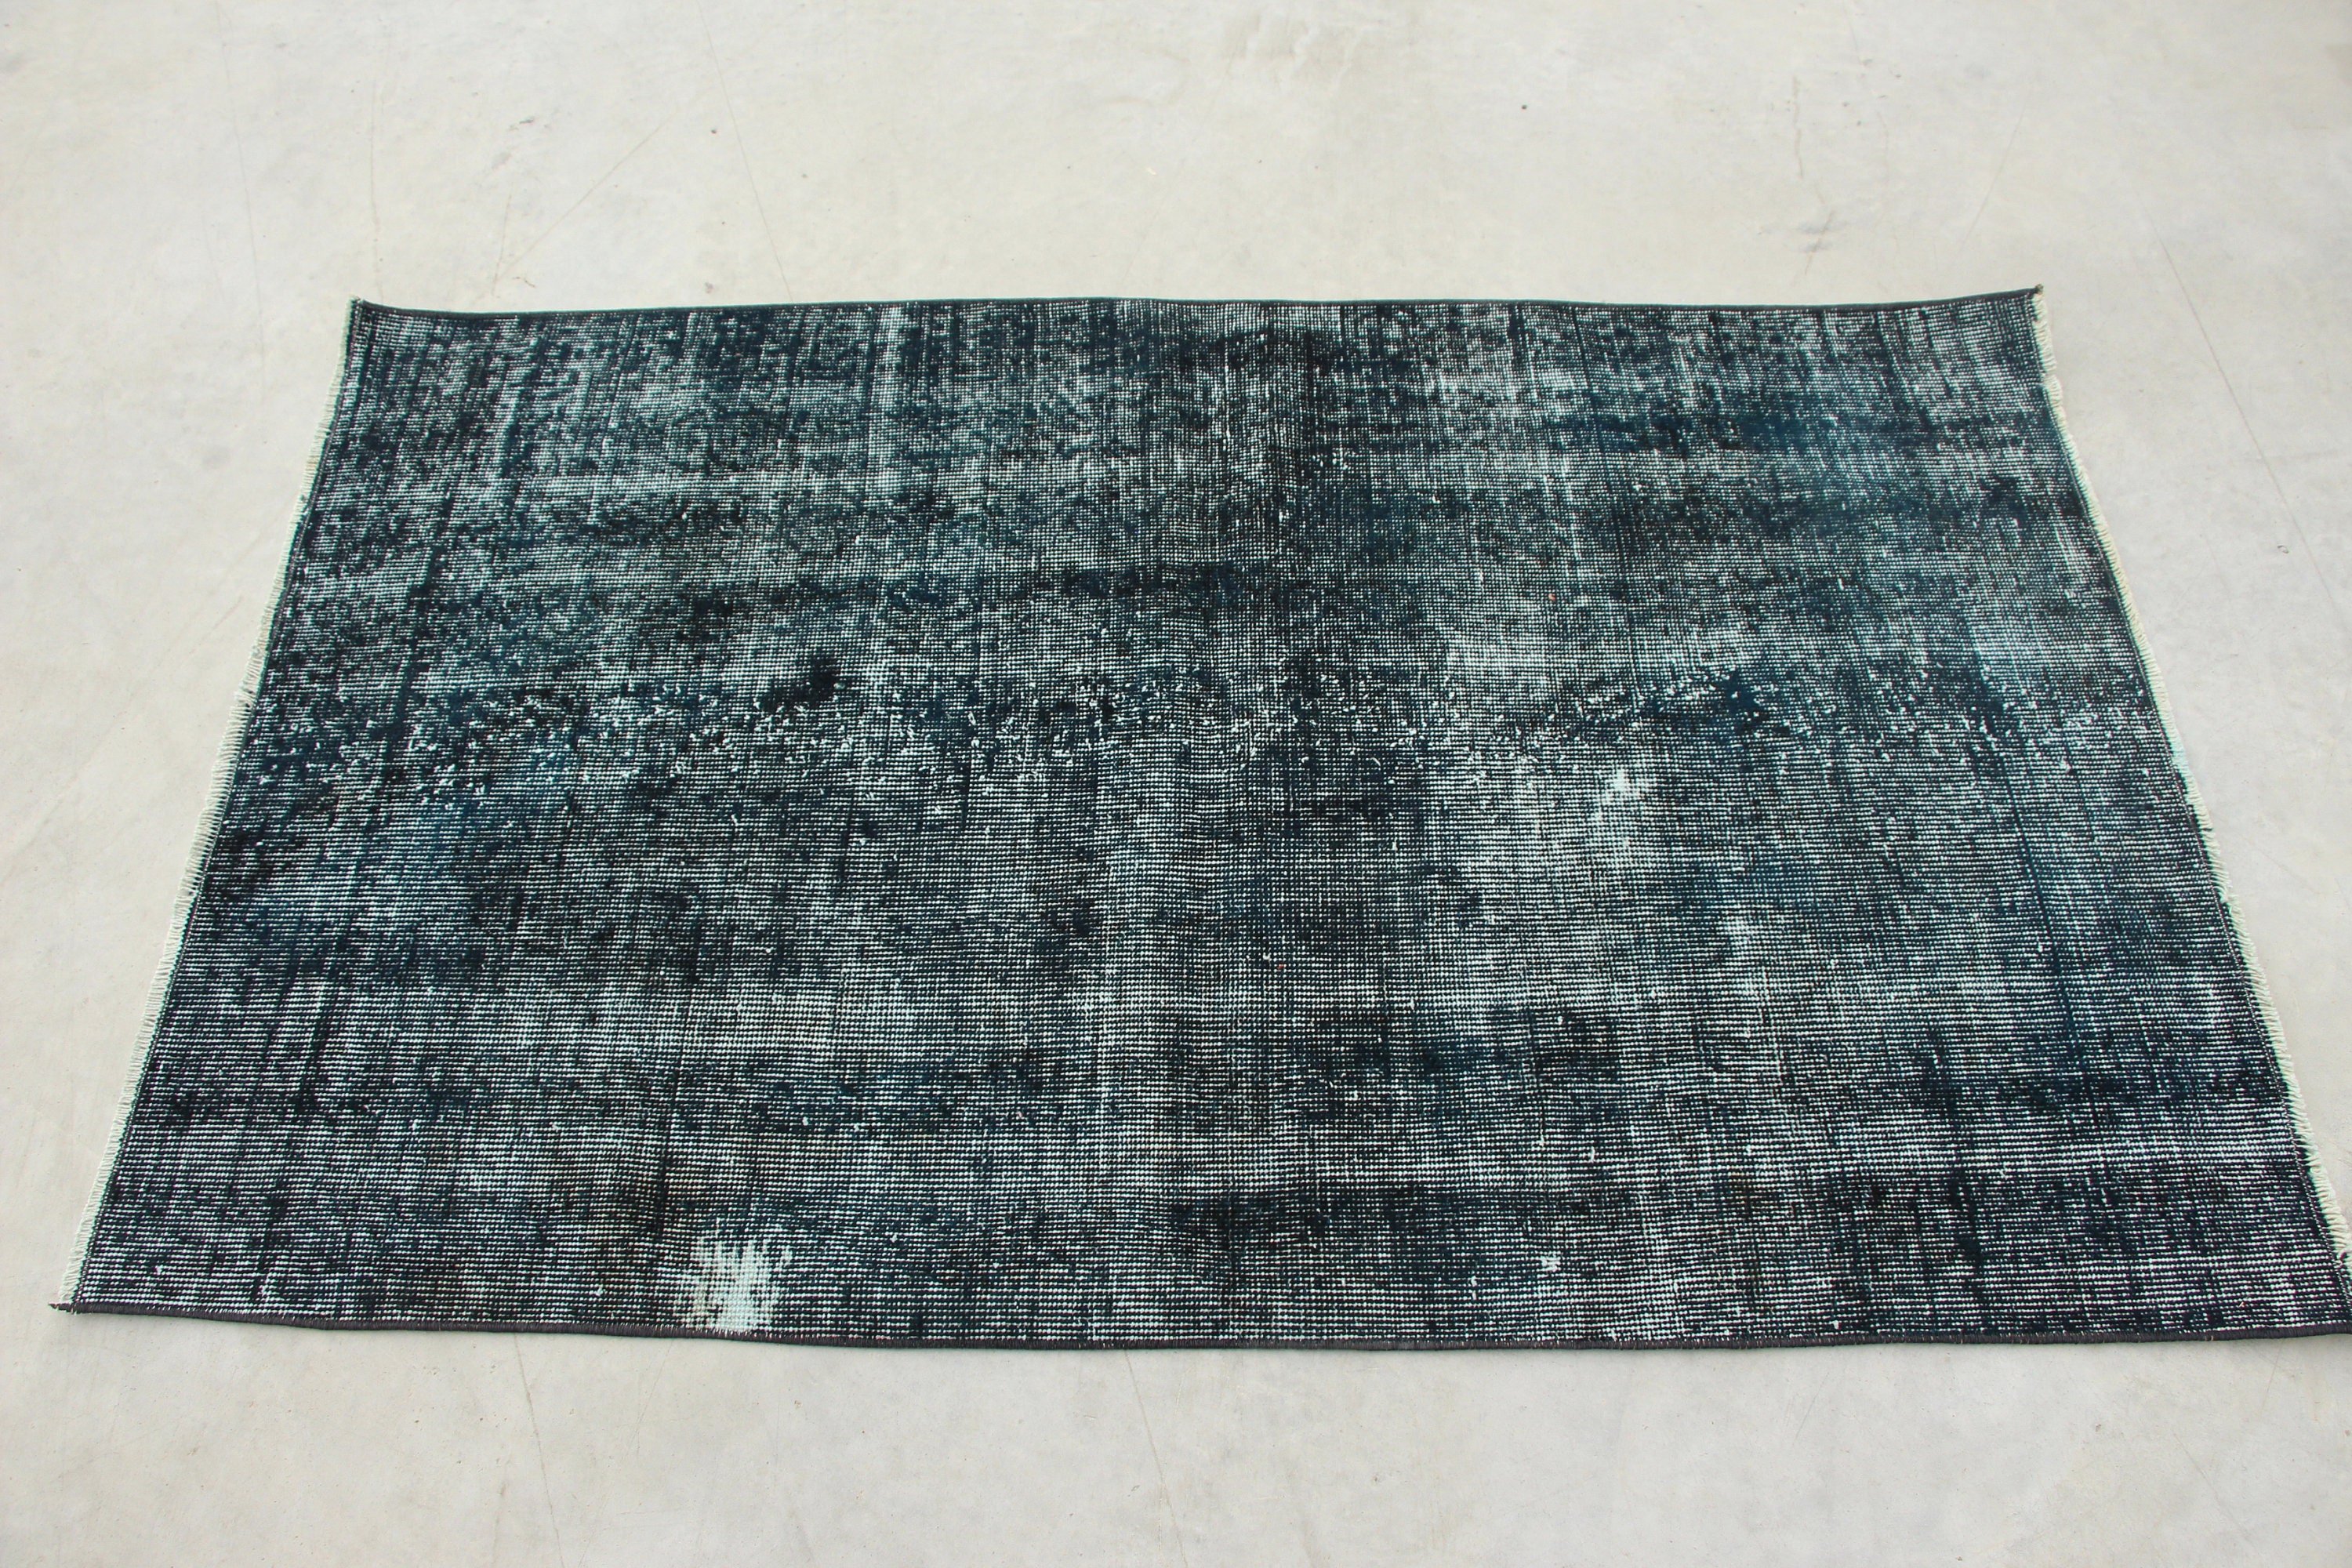 Vintage Rug, Kitchen Rugs, Bath Rug, 3x4.9 ft Small Rugs, Blue Kitchen Rugs, Turkish Rugs, Abstract Rug, Rugs for Entry